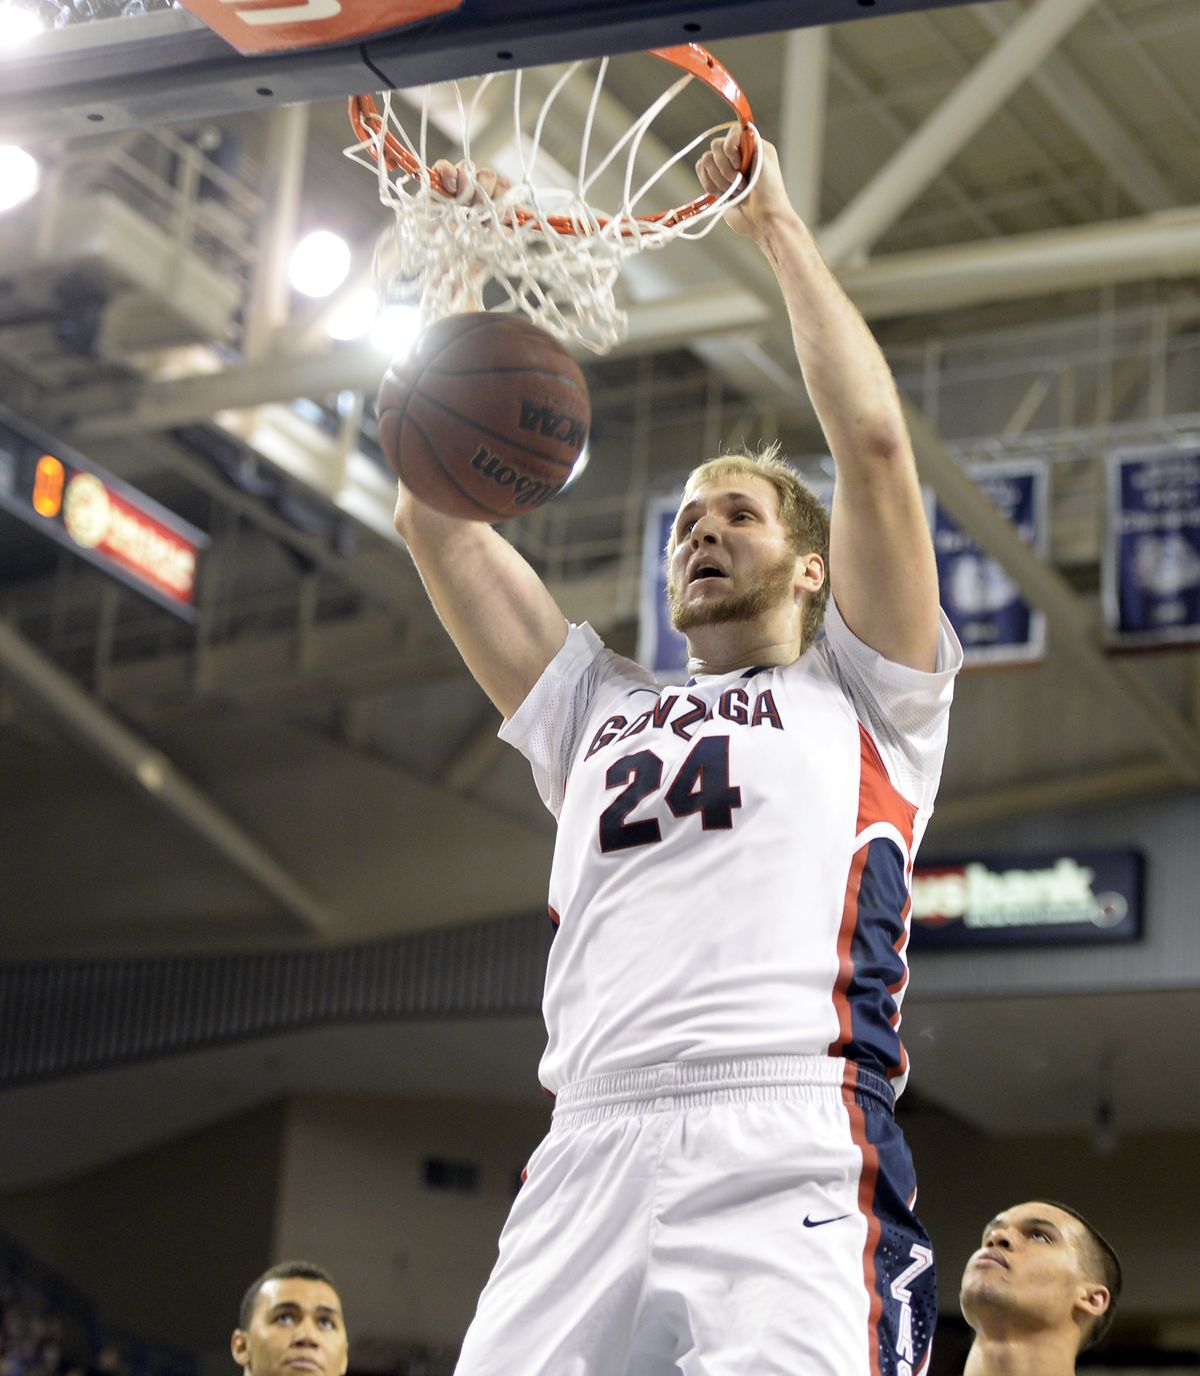 Gonzaga center Przemek Karnowski had a big impact as a sophomore, but figures to grow even more in his junior year. (Jesse Tinsley)